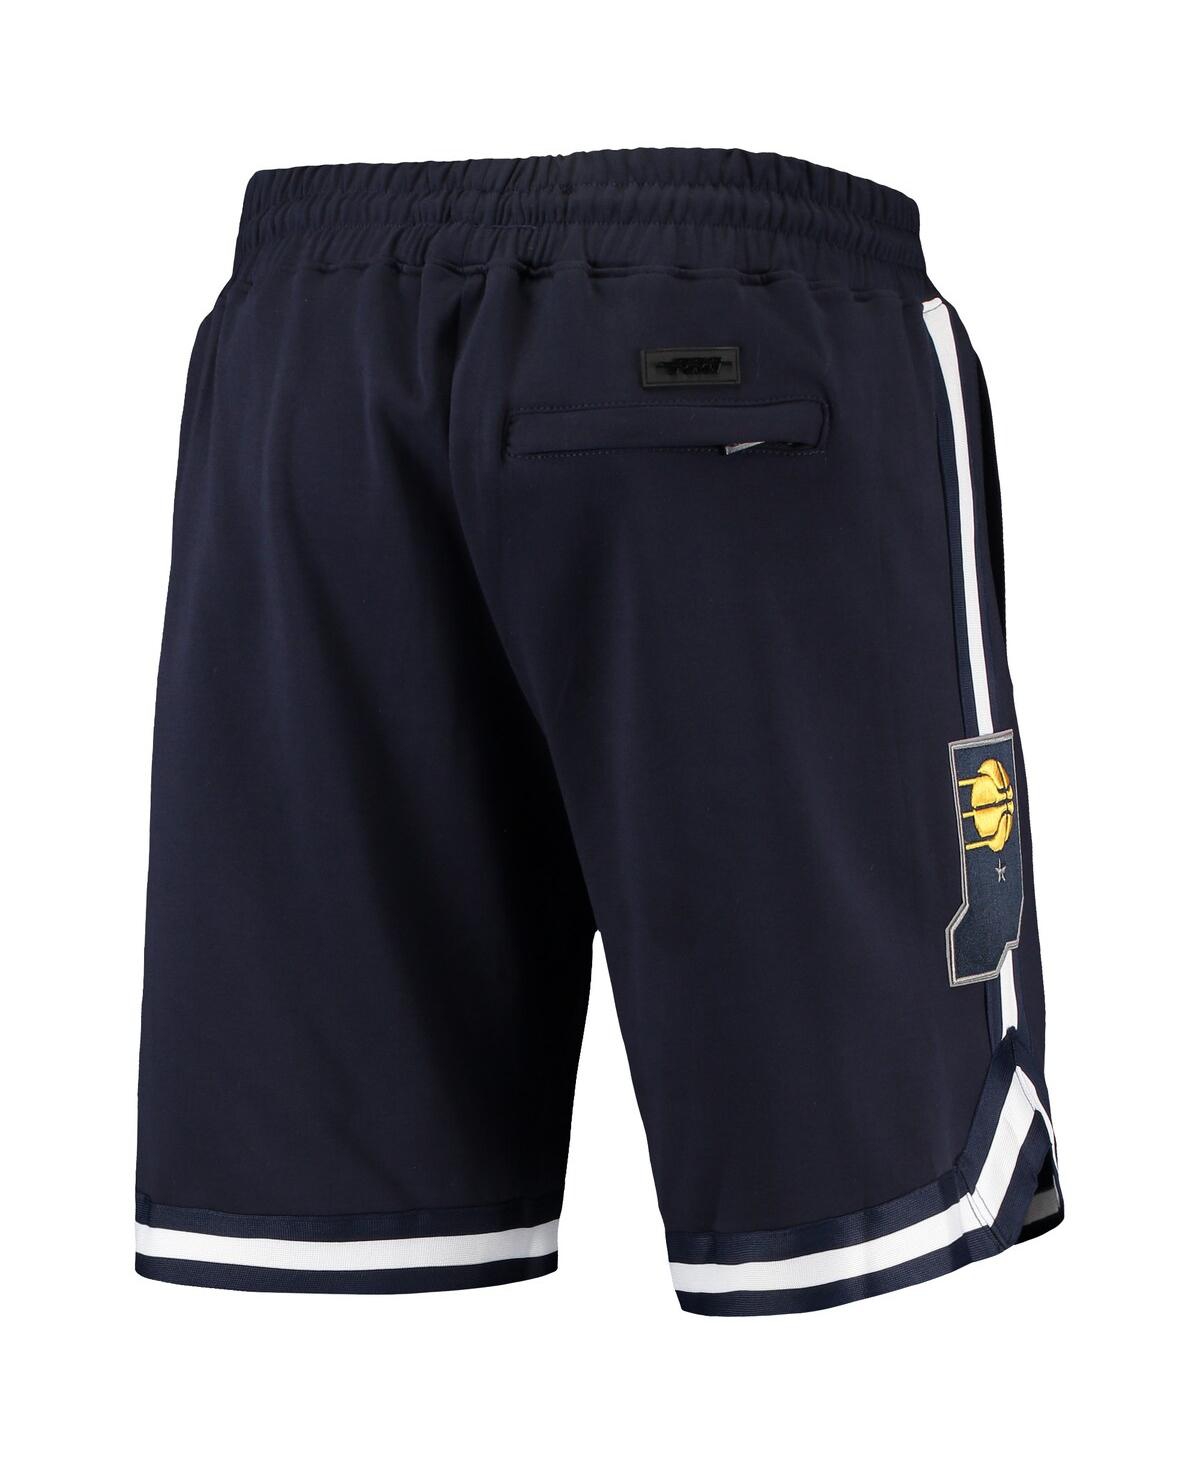 Stephen Curry Golden State Warriors Pro Standard Team Player Shorts - Royal